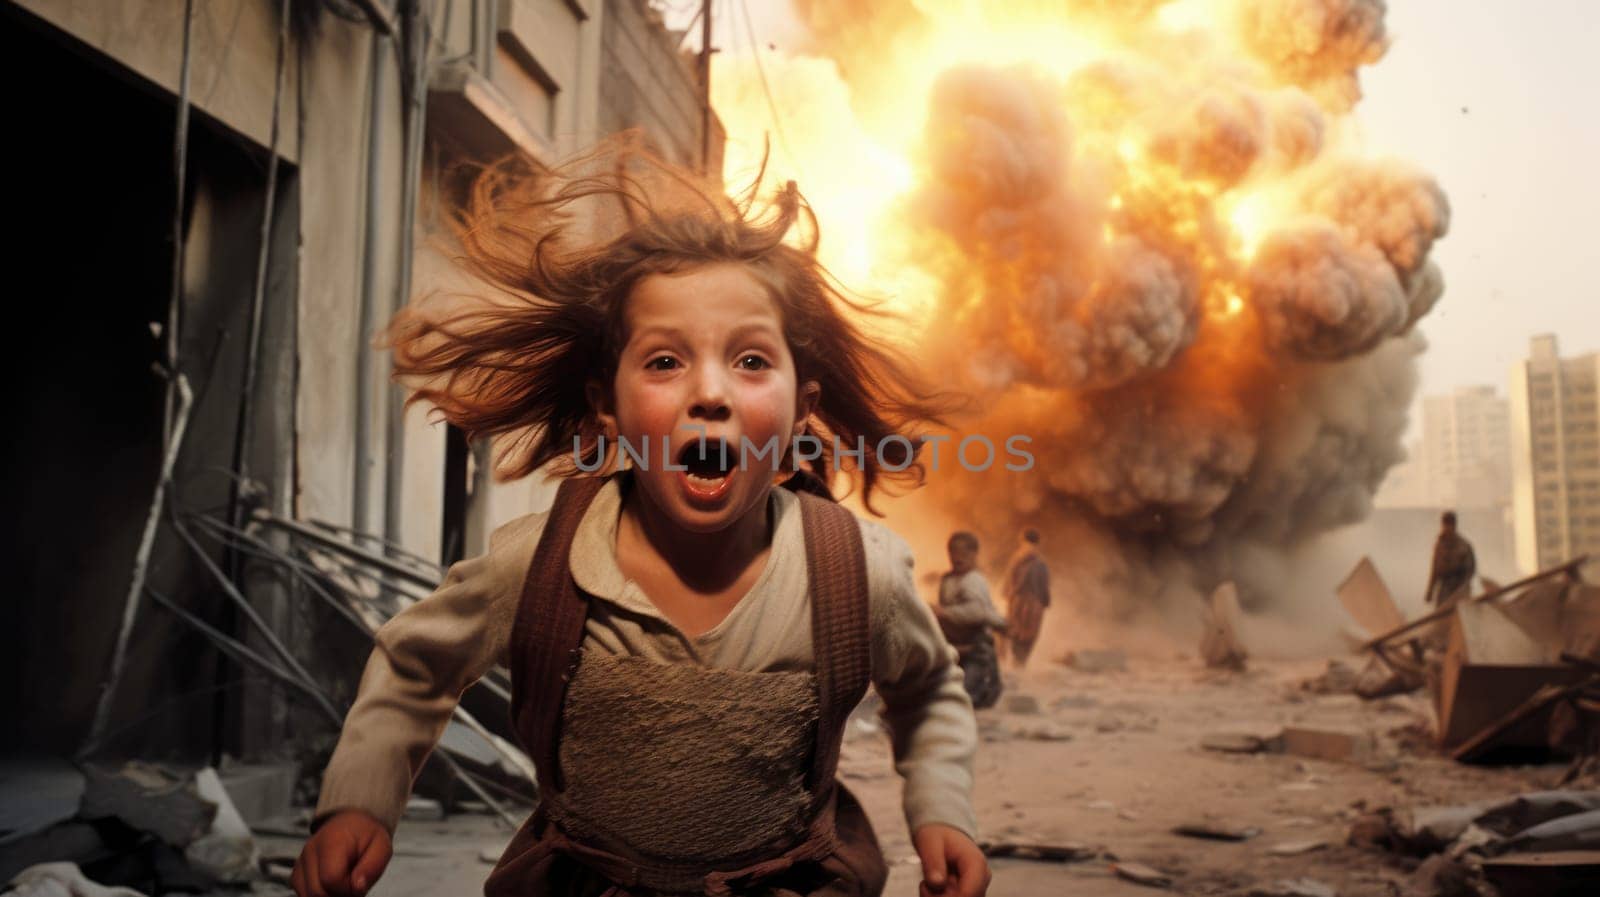 Innocent civilian running away from missile attack in the city by biancoblue